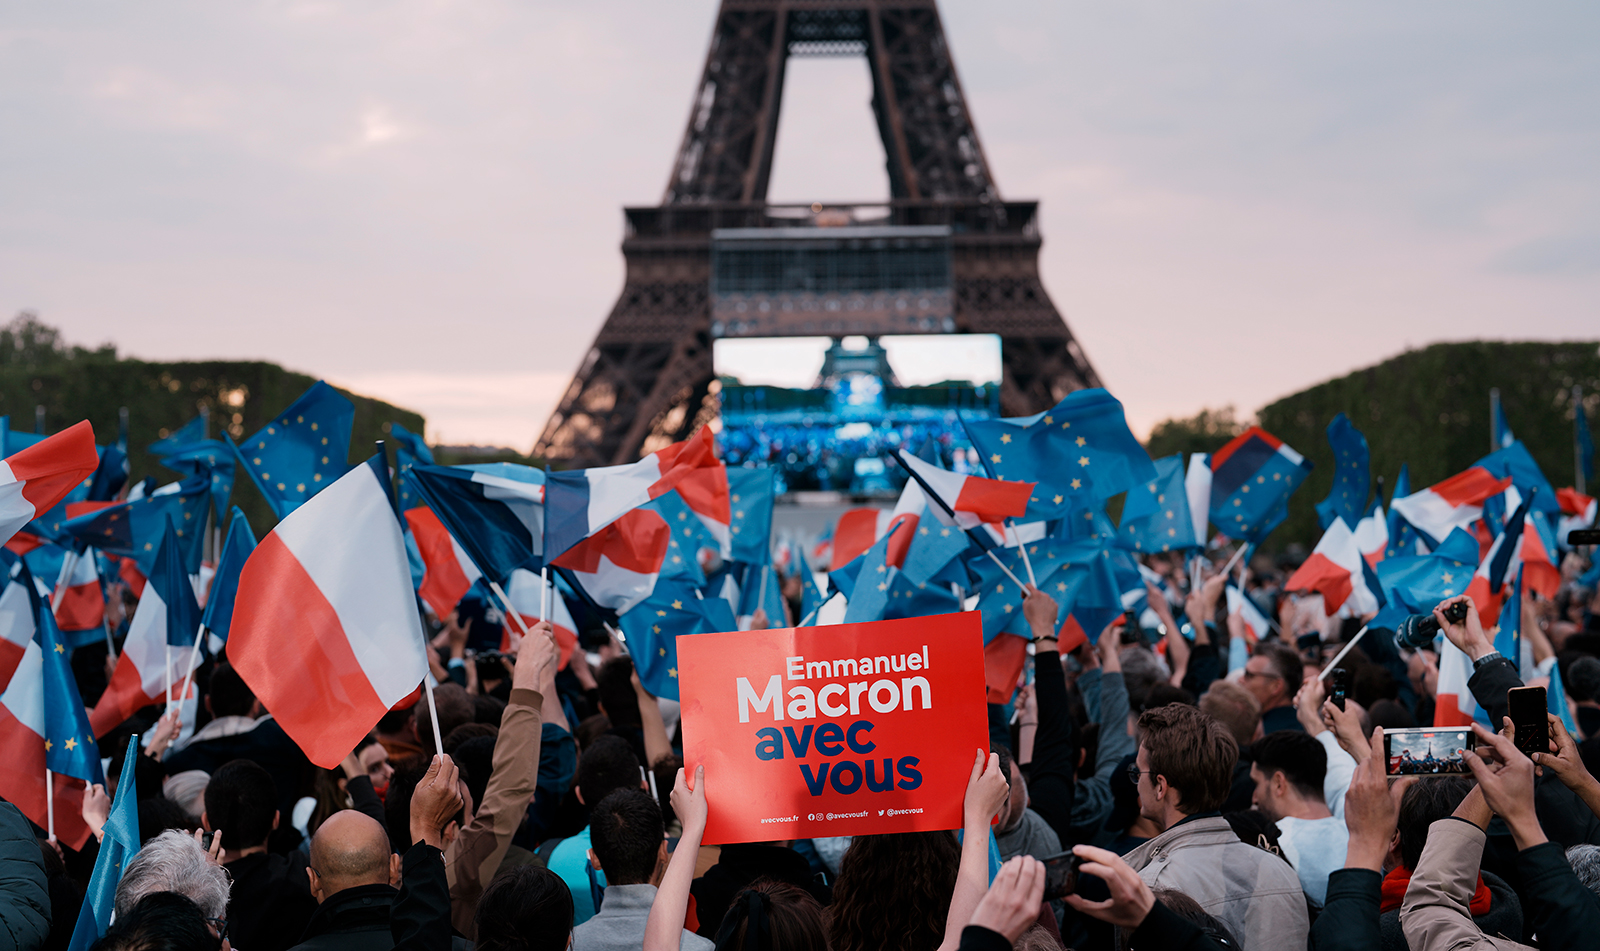 A supporter of French President Emmanuel Macron holds a placard reading "Emmanuel Macron With You" and others wave flags as they watch the first election projections being announced in Paris, France, Sunday, April 24.